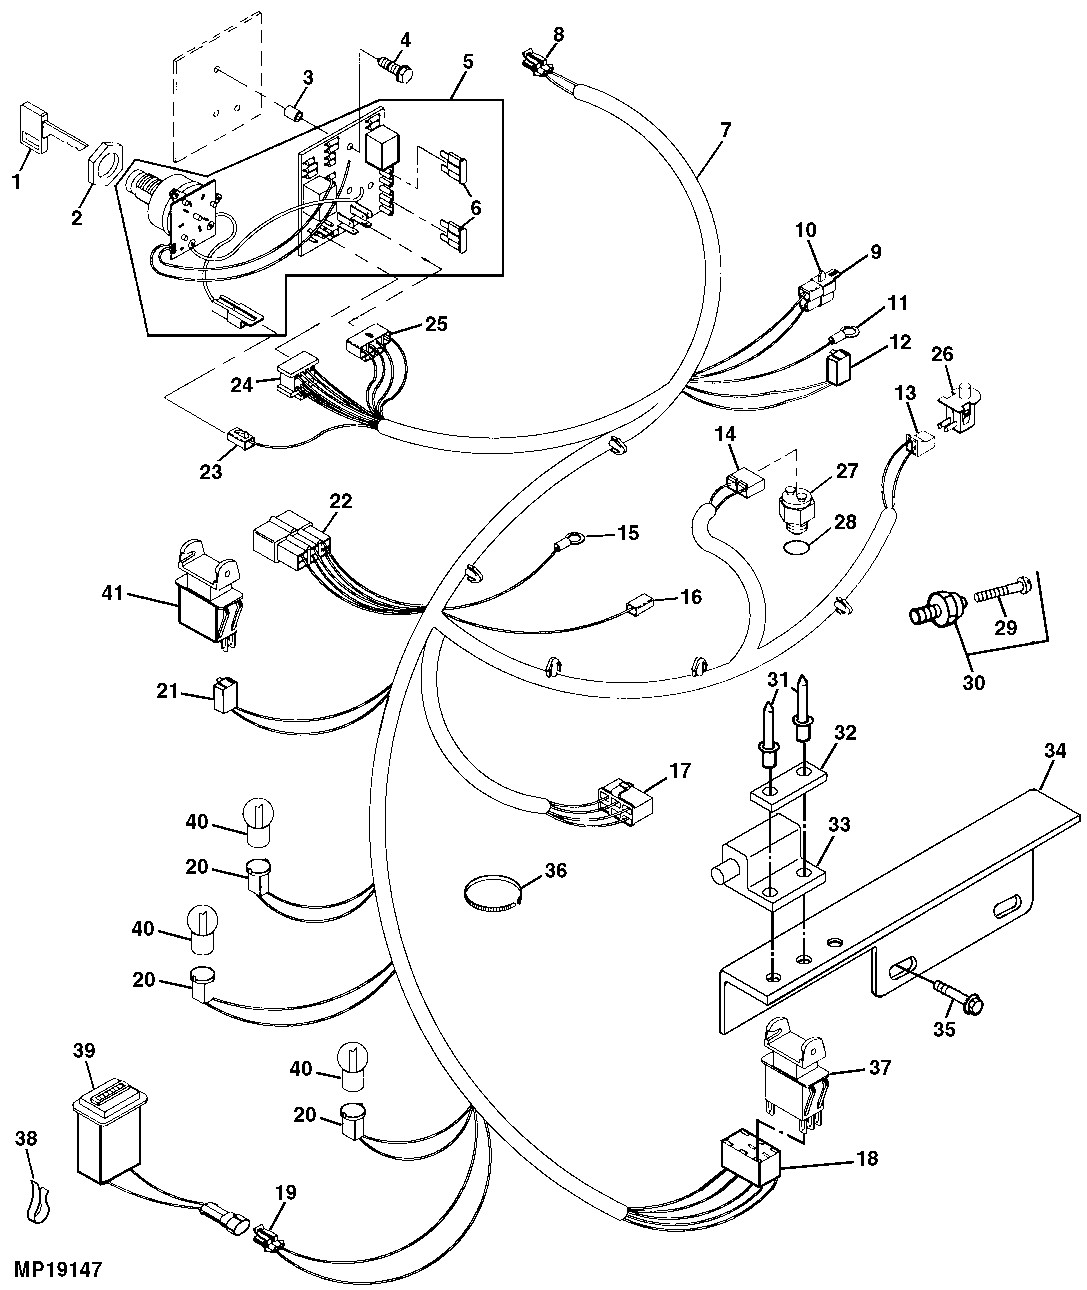 Wiring Diagram for A Water Cooled Gx345 John Deer Lawn Mower where May I Find A Wiring Schematic for Jd 345 issues with Pto Thx Of Wiring Diagram for A Water Cooled Gx345 John Deer Lawn Mower